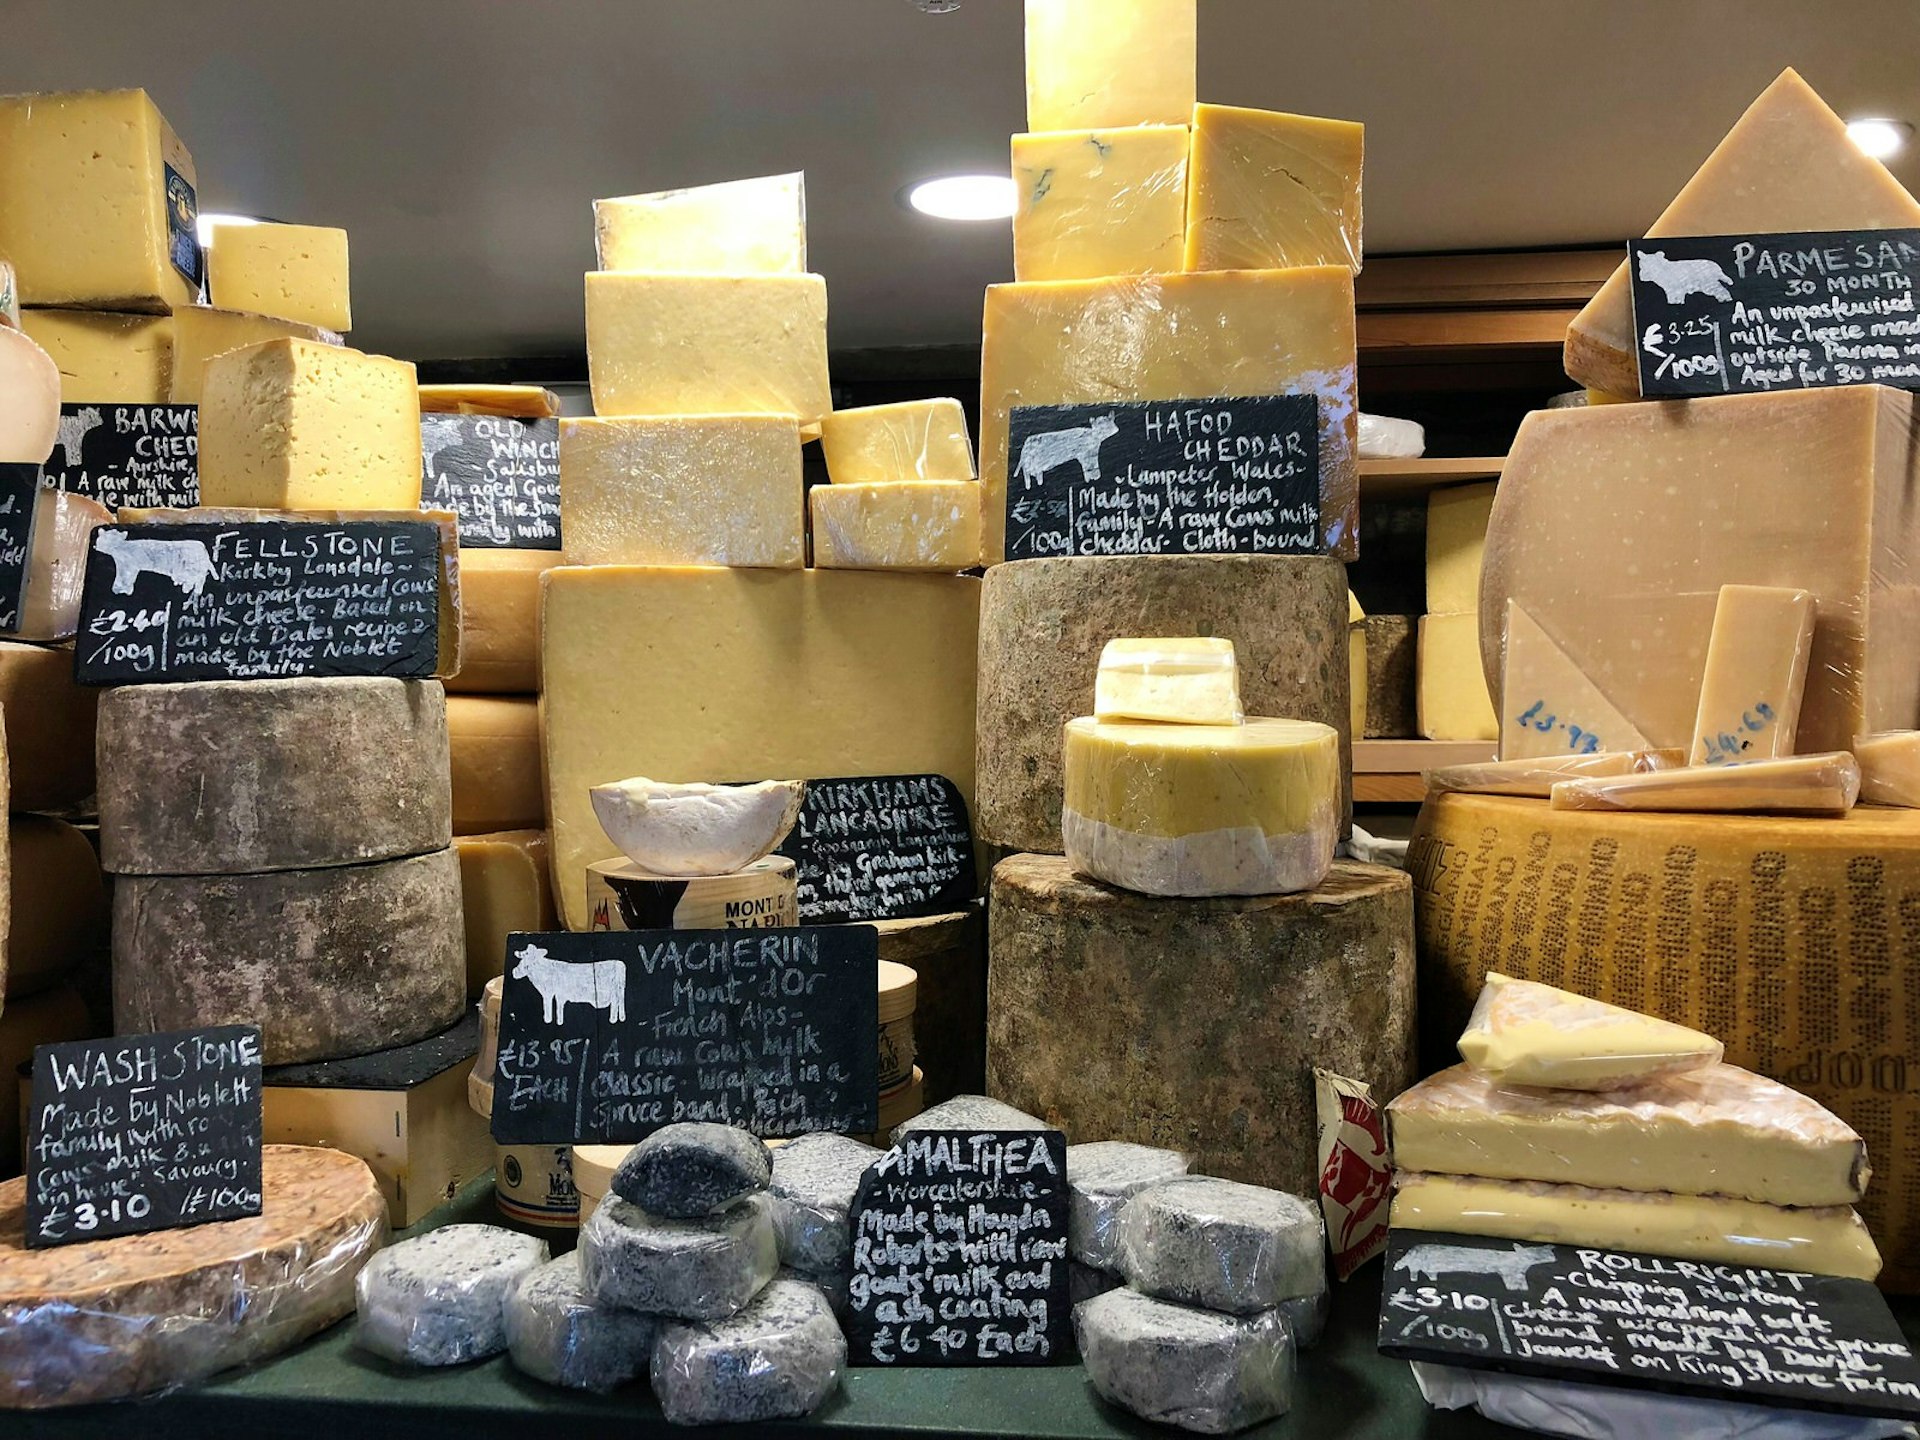 Cheese of all shapes and sizes on display in the Courtyard Dairy, North Yorkshire.